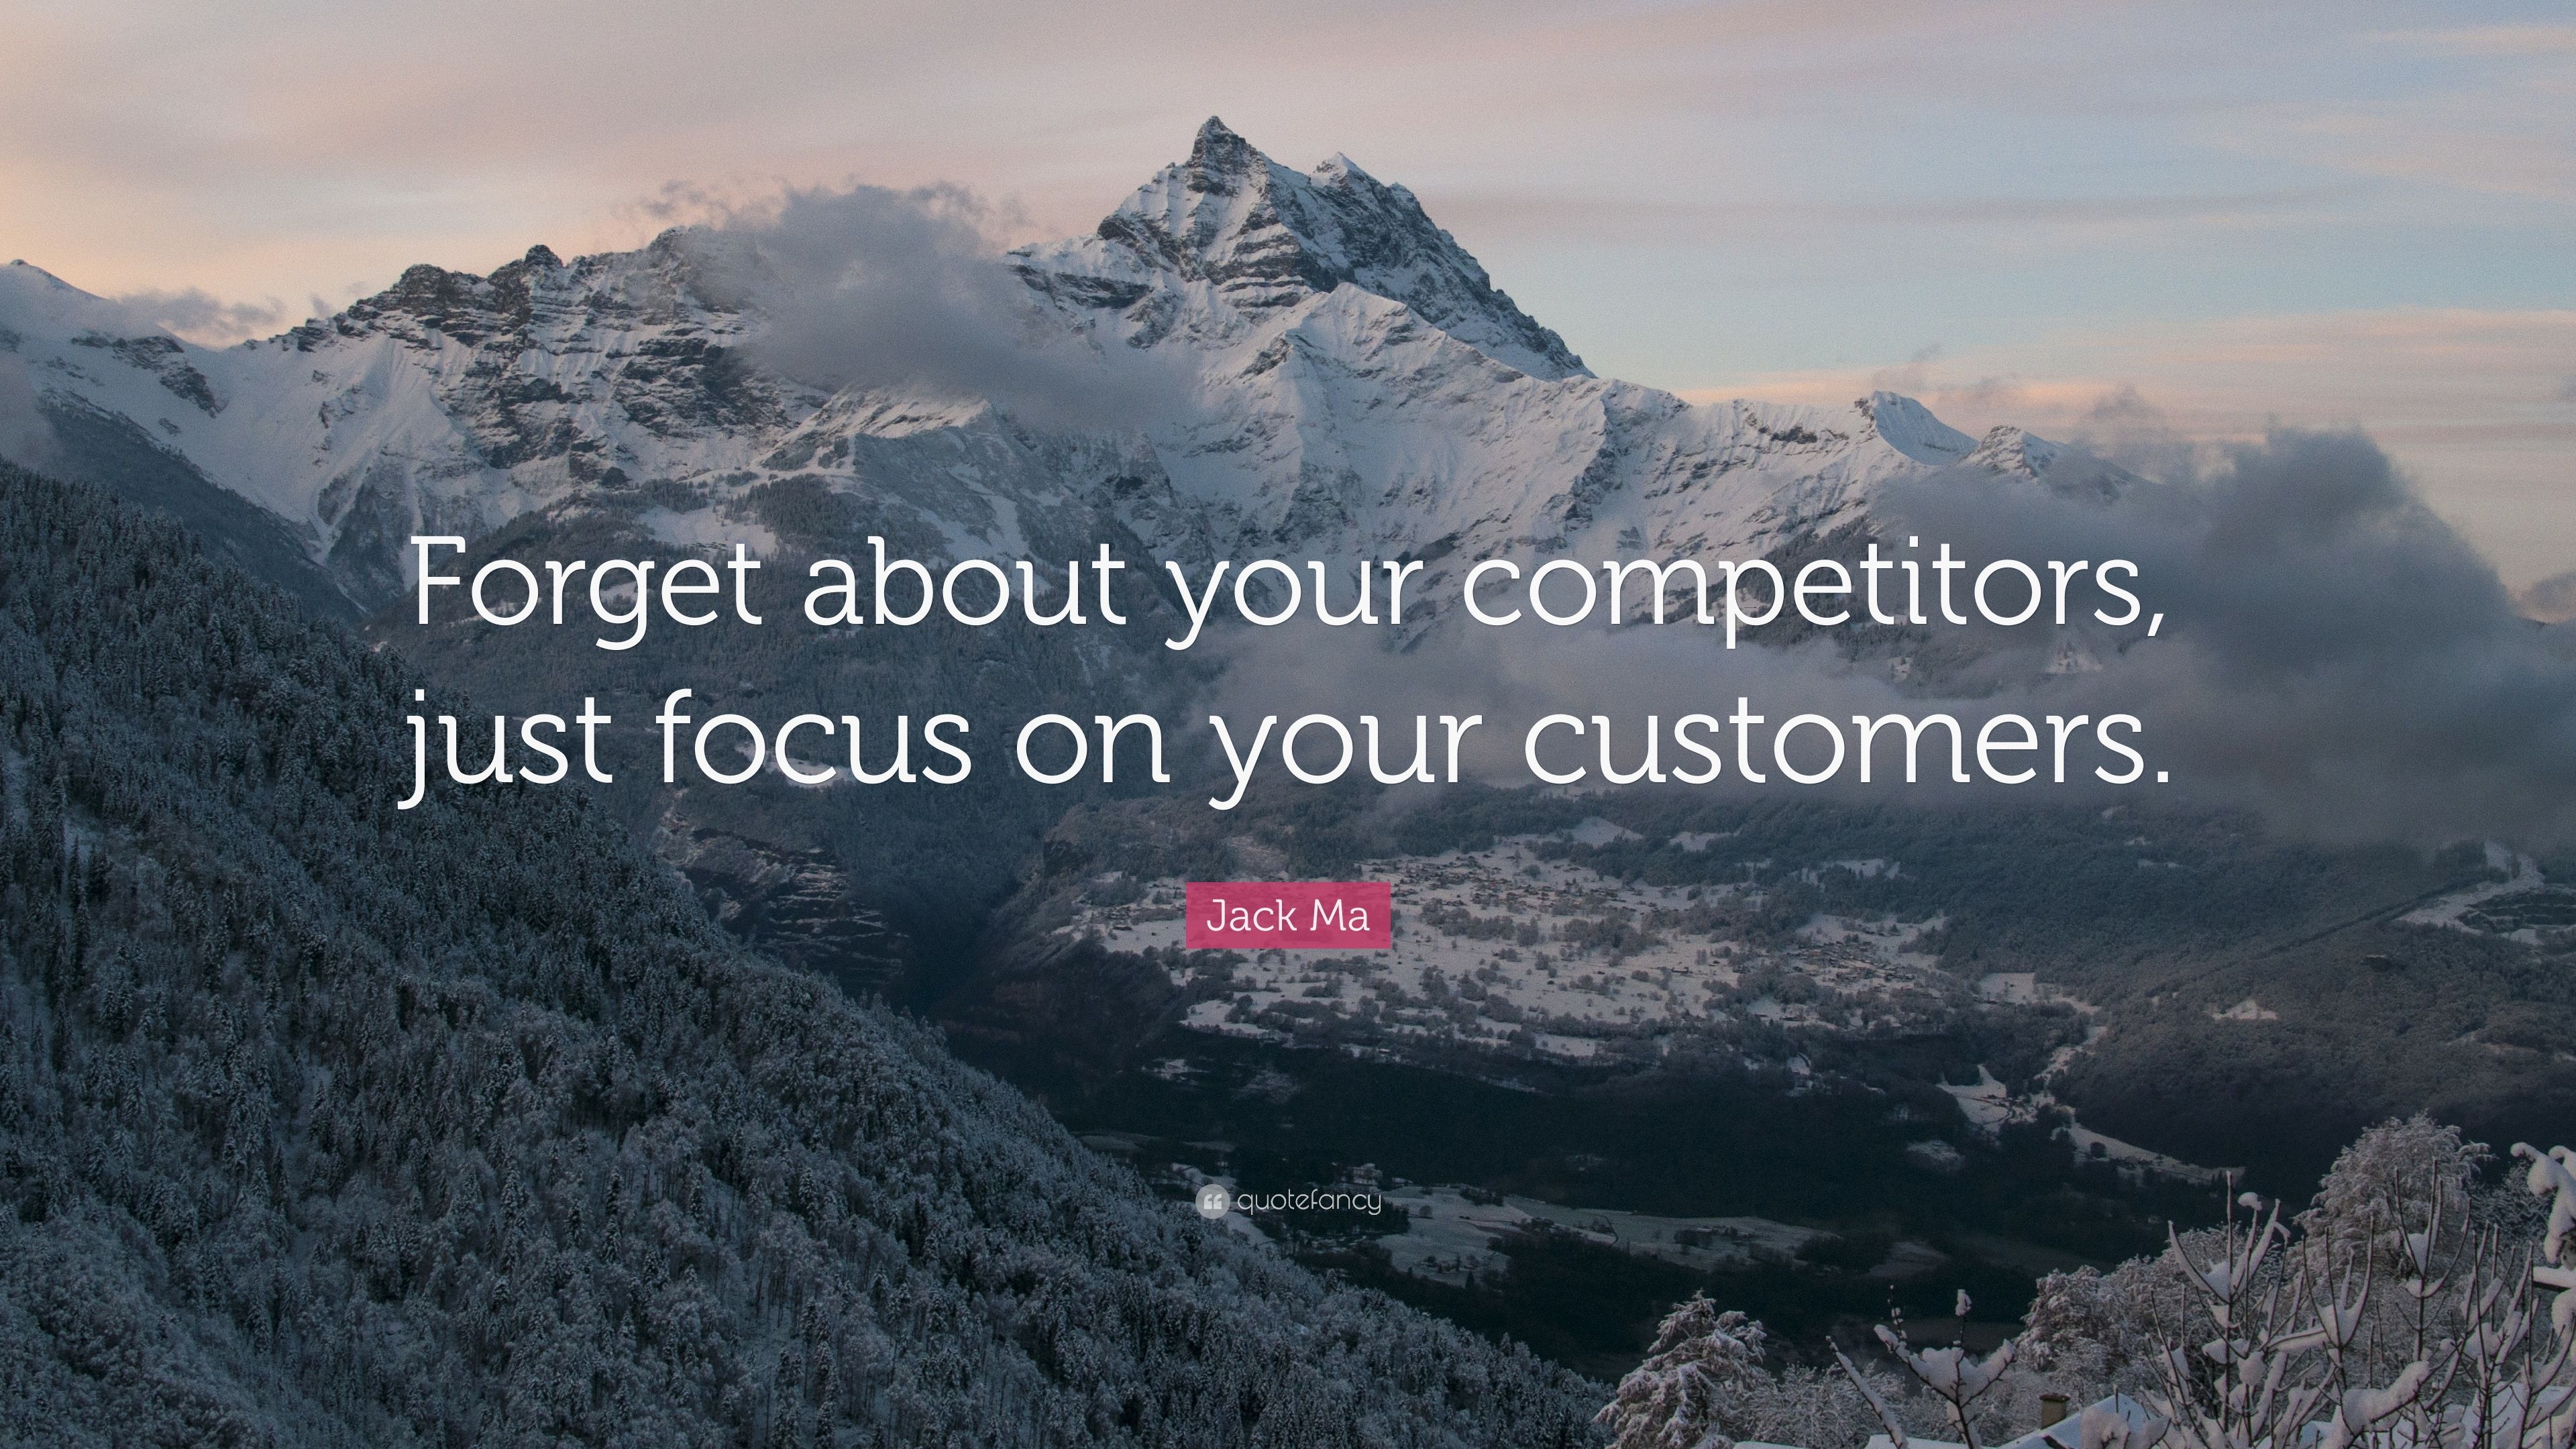 Jack Ma Quote: “Forget about your competitors, just focus on your